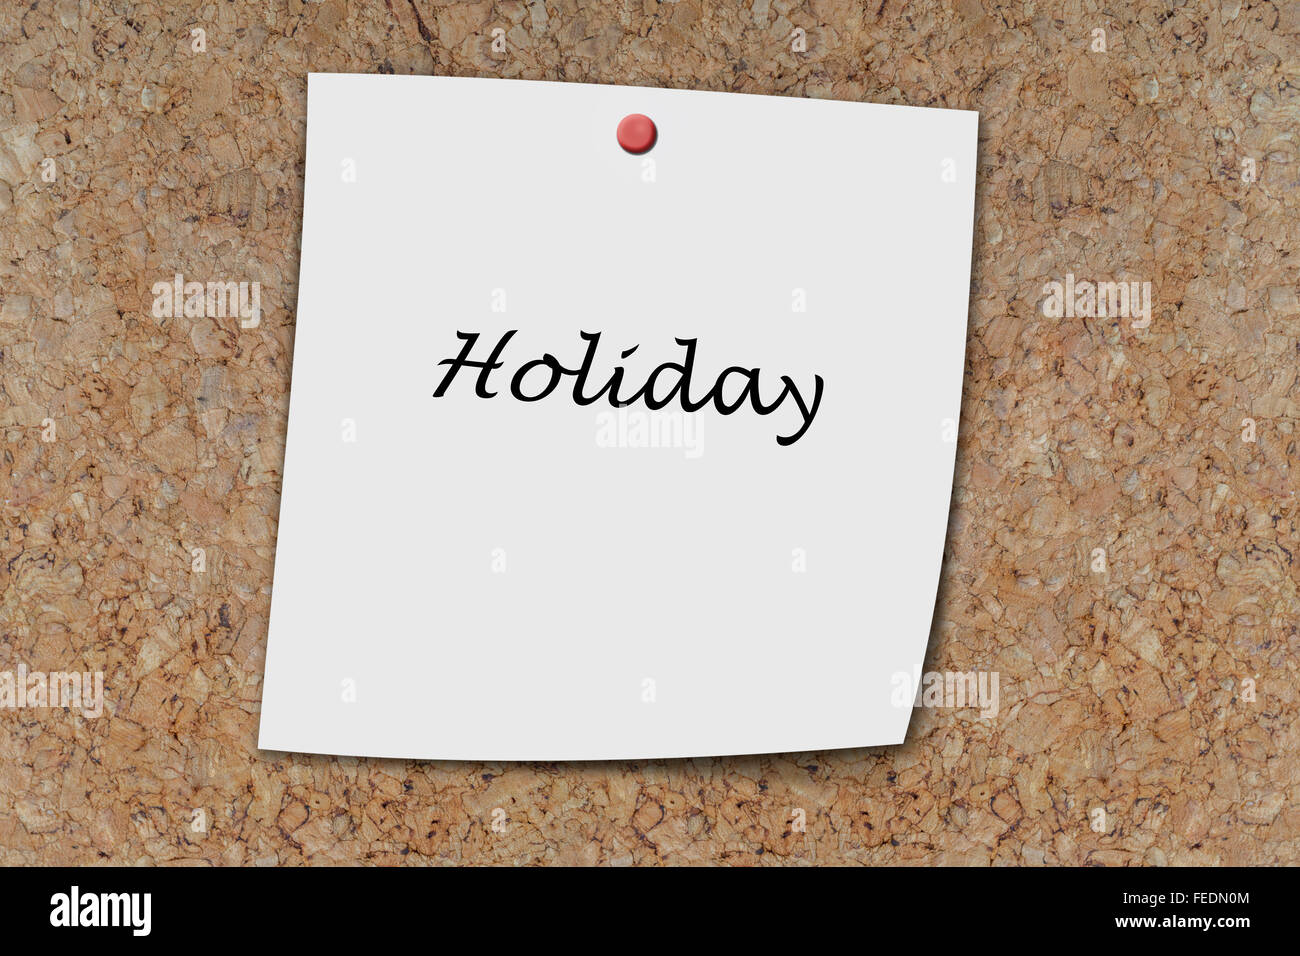 Holiday written on a memo pinned on a cork board Stock Photo